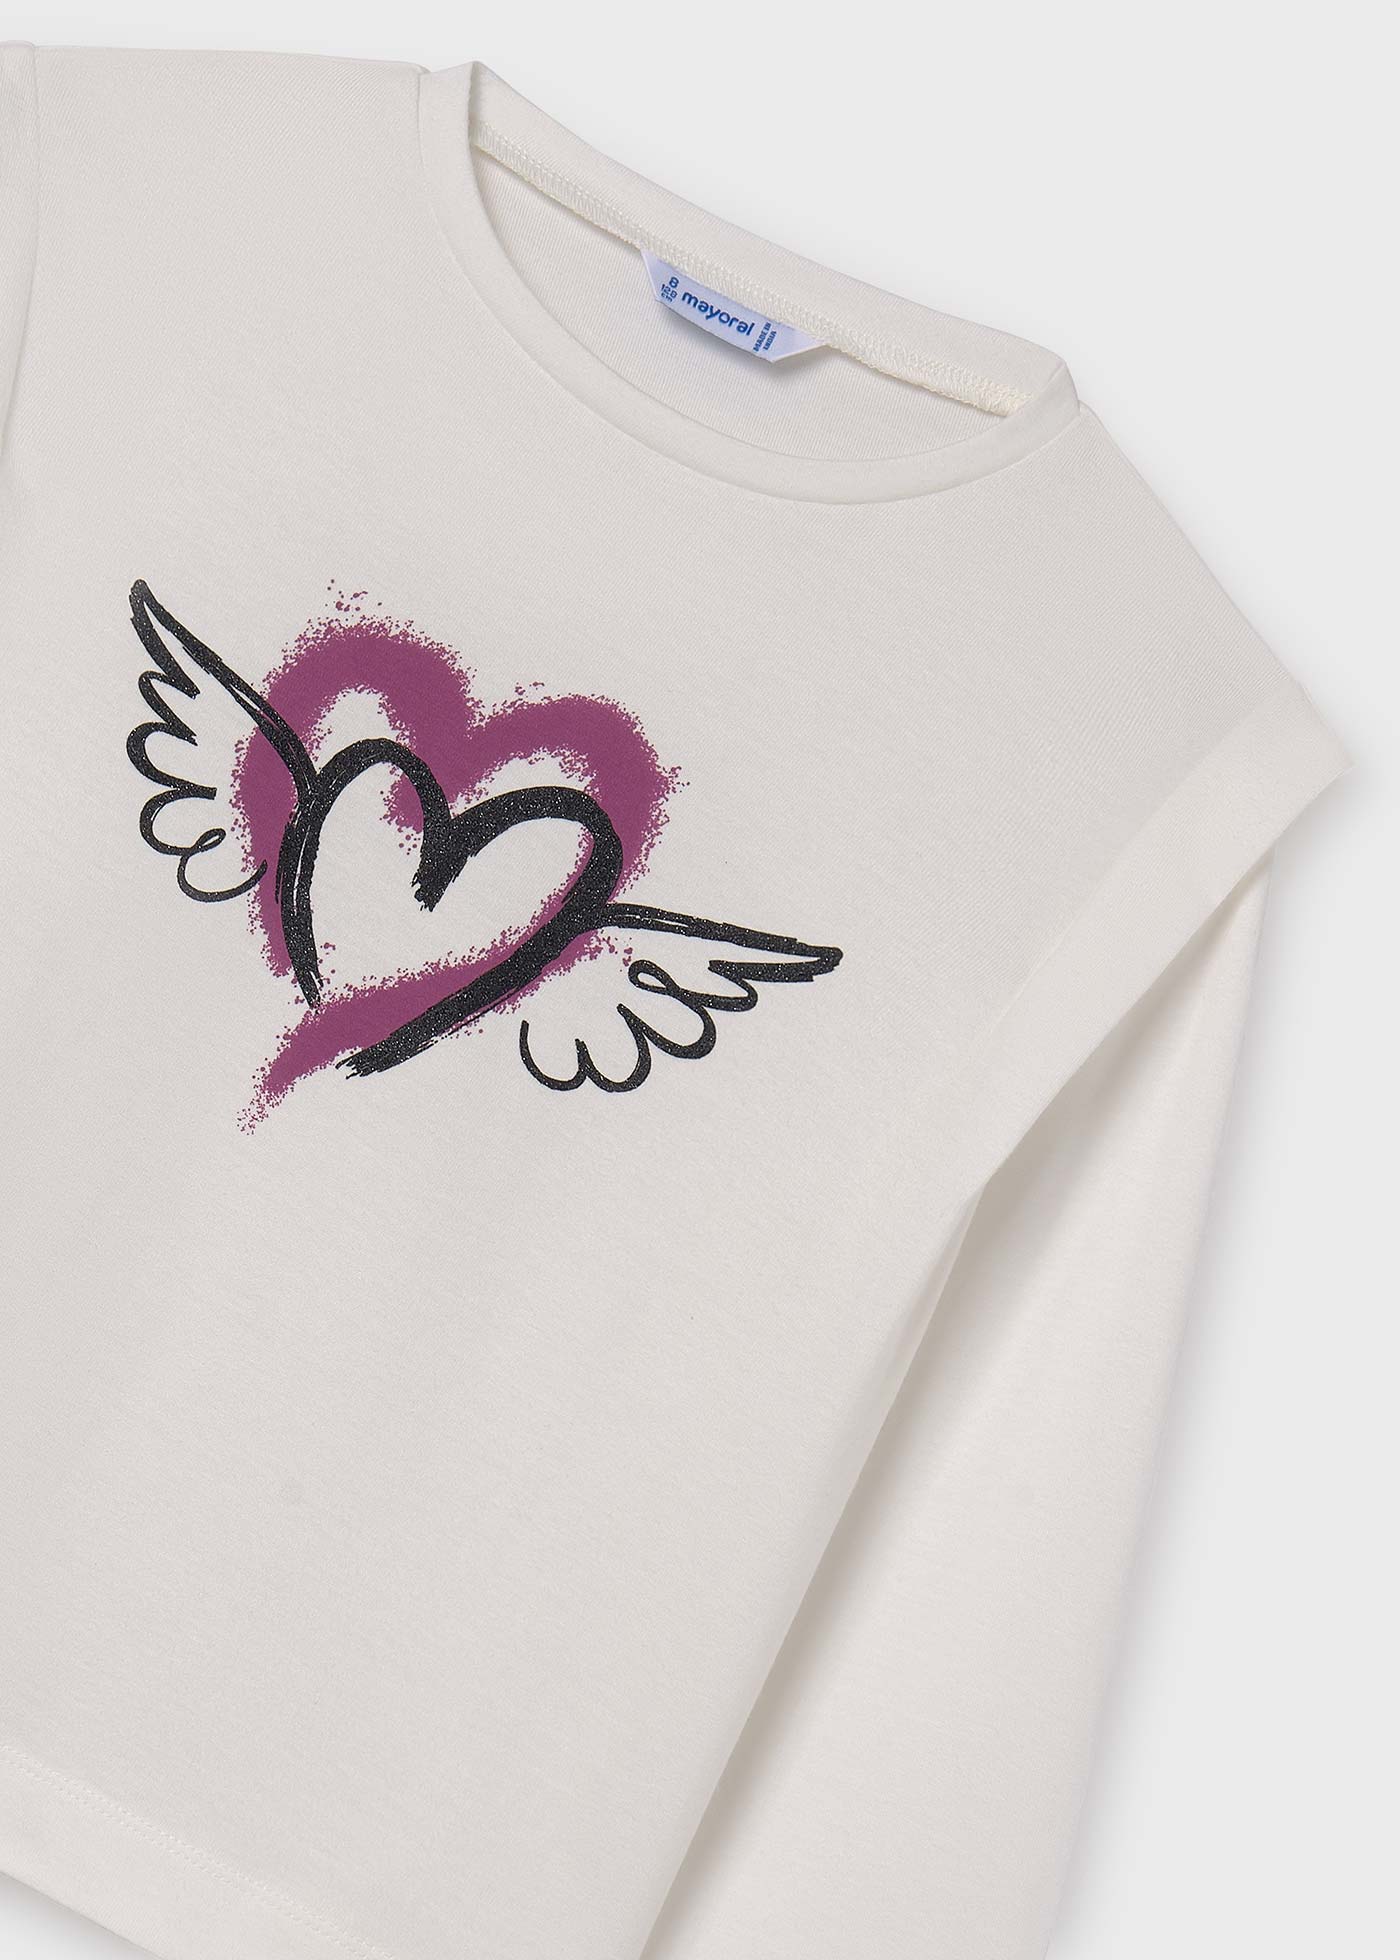 Graphic T-shirt for girls